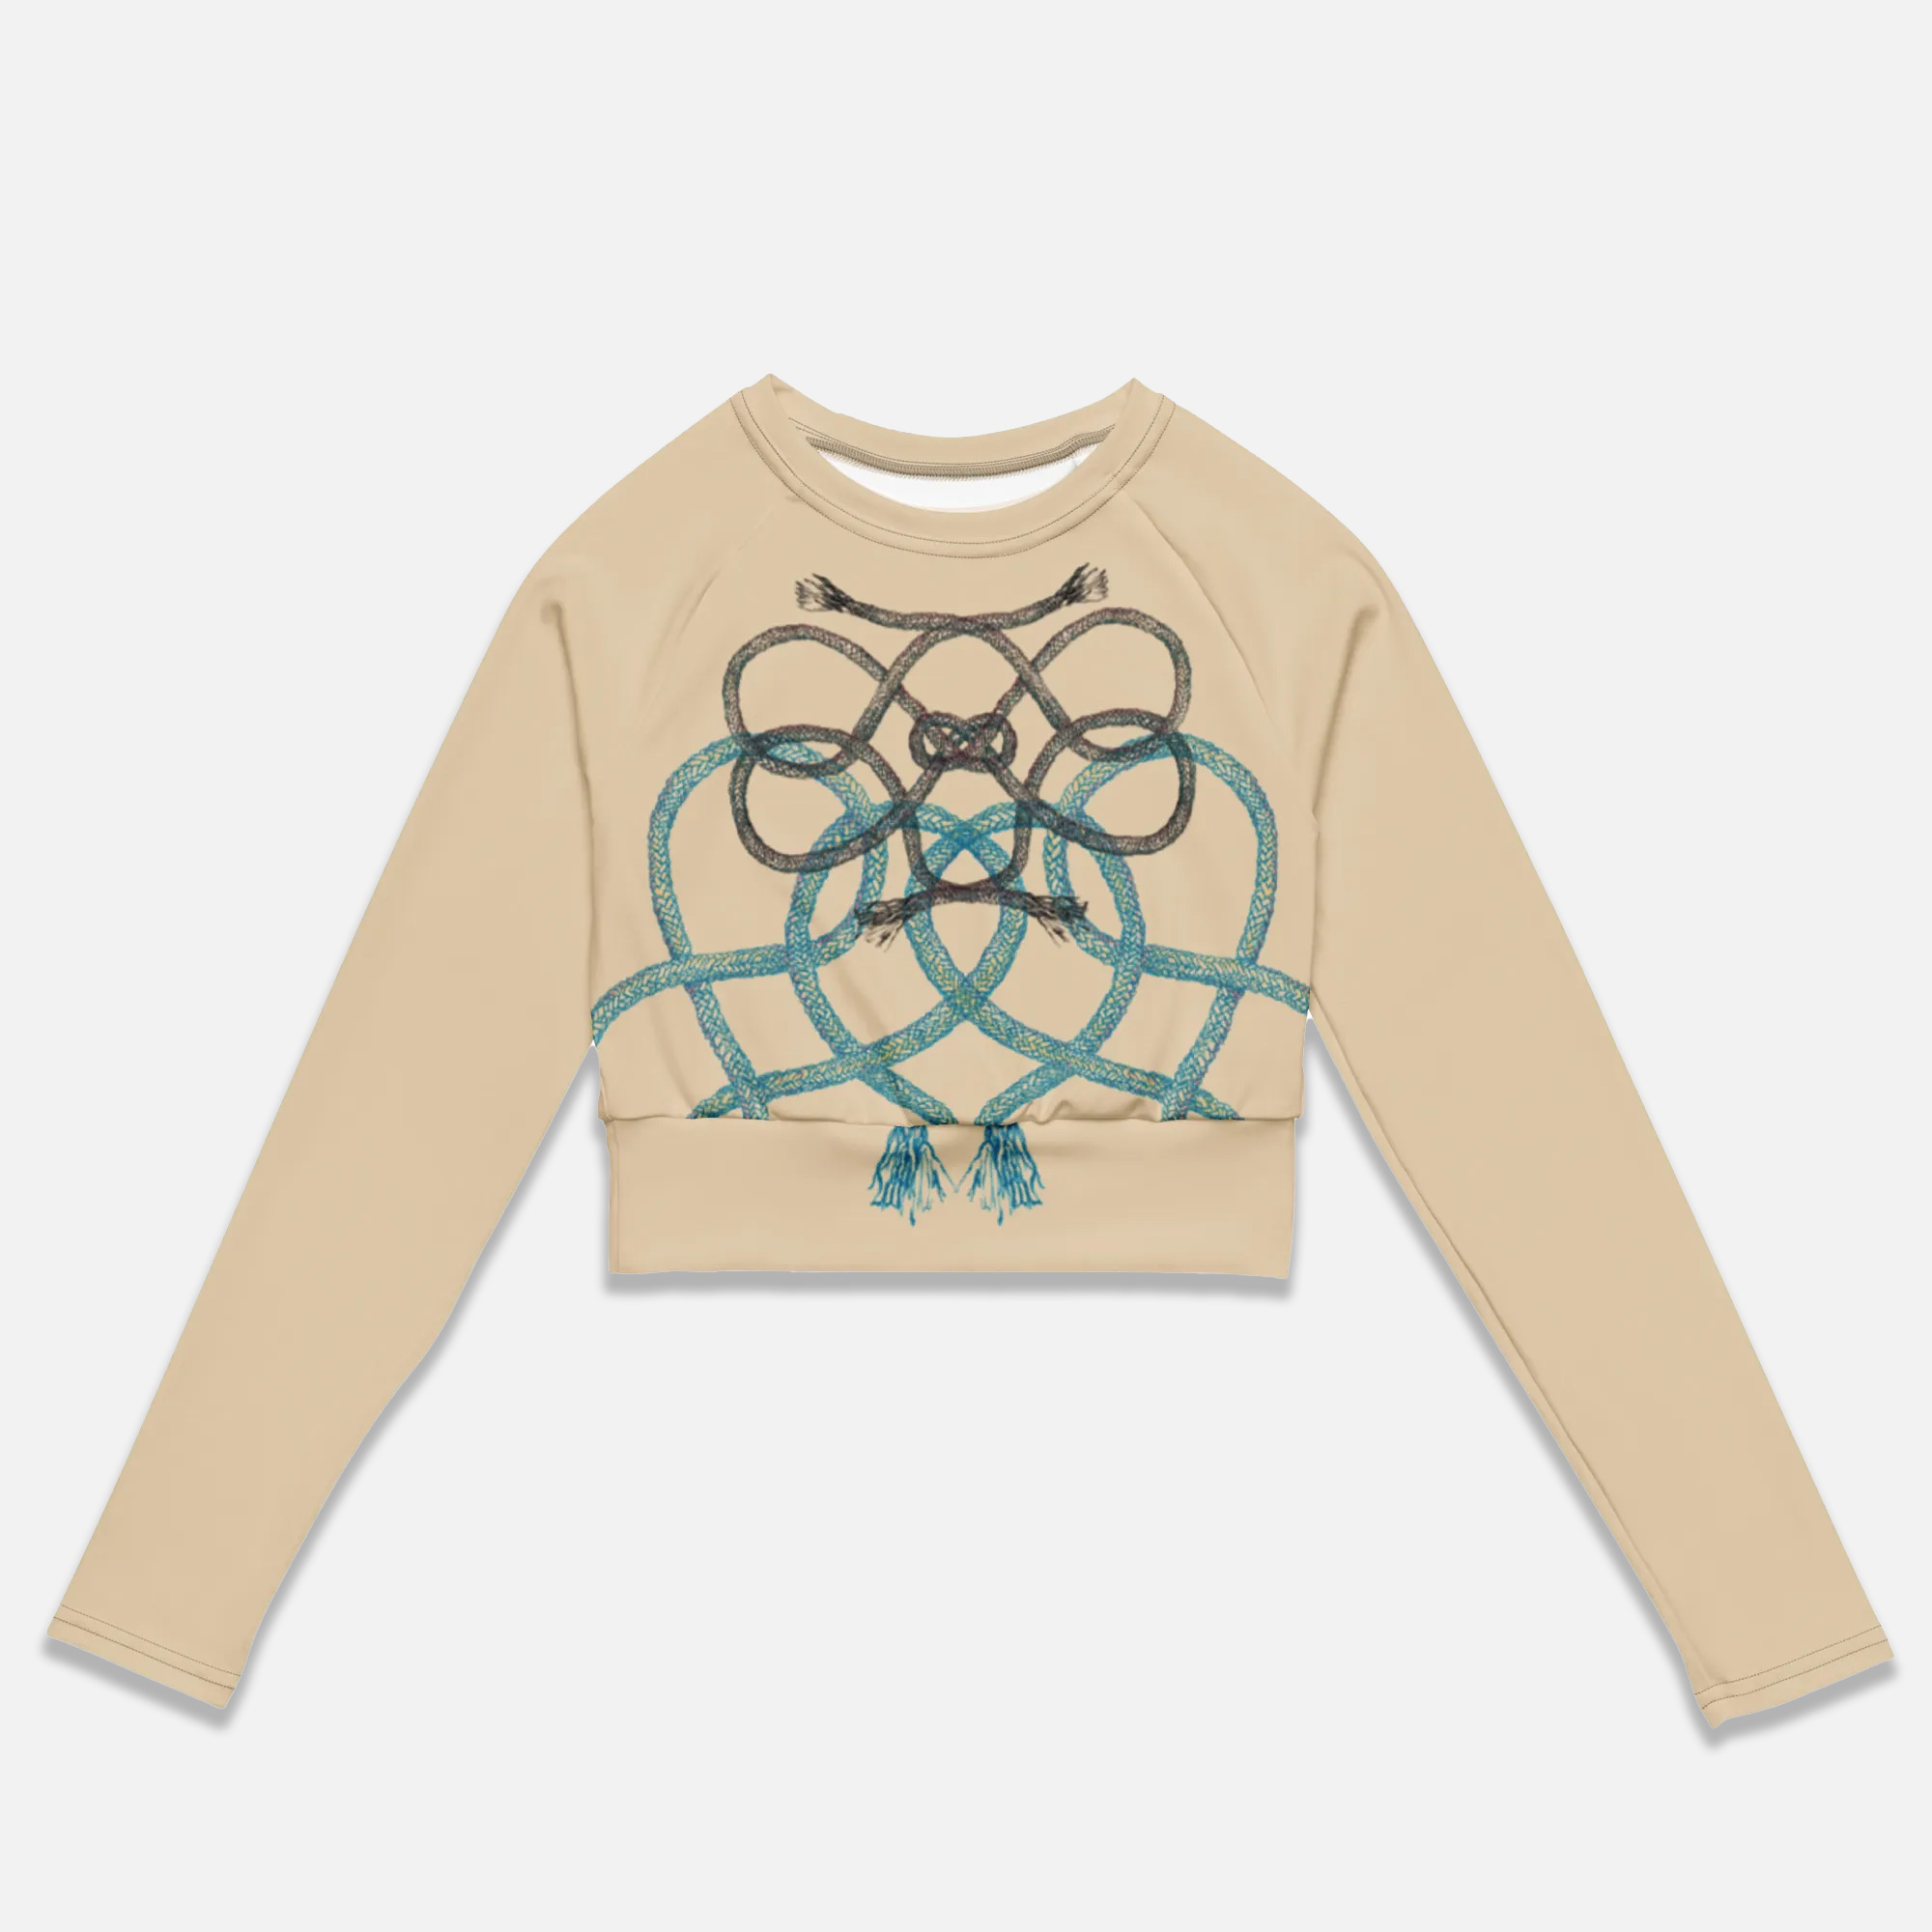 Rope + Hearts cropped long-sleeved tee